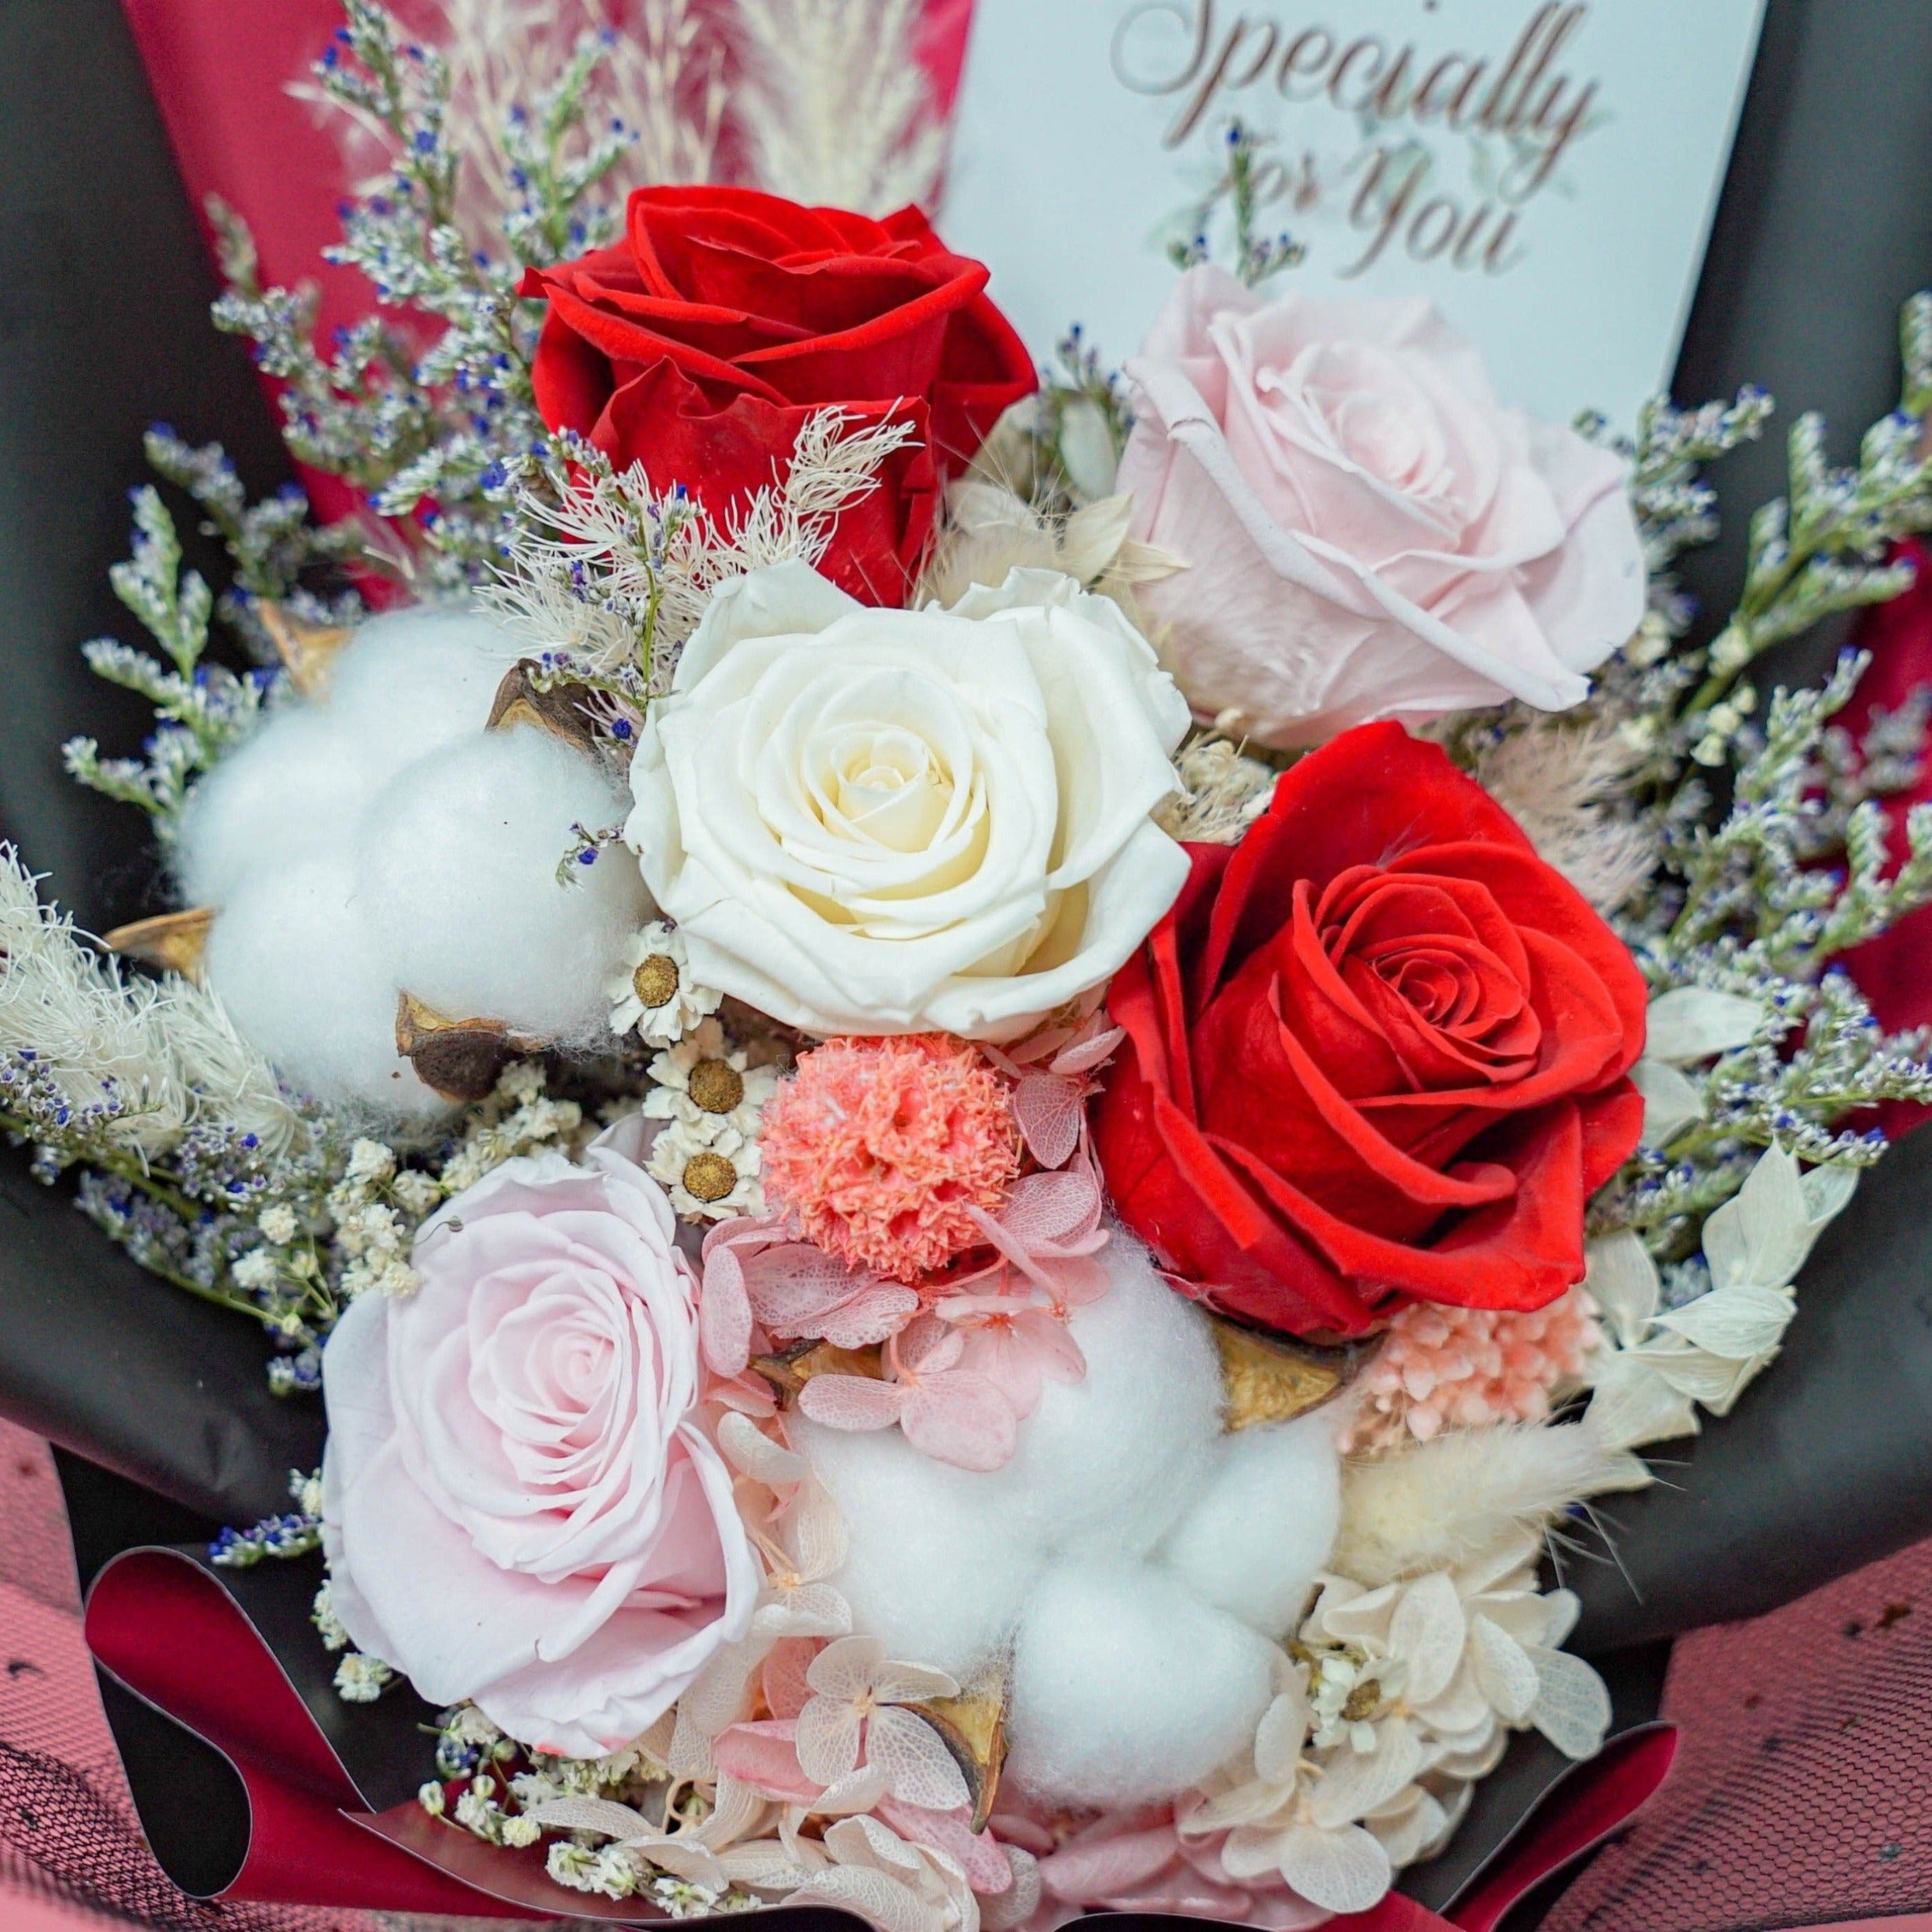 Preserved Flower Bouquet - 5 Stalks Roses (2 Red, 2 Baby Pink, 1 White)